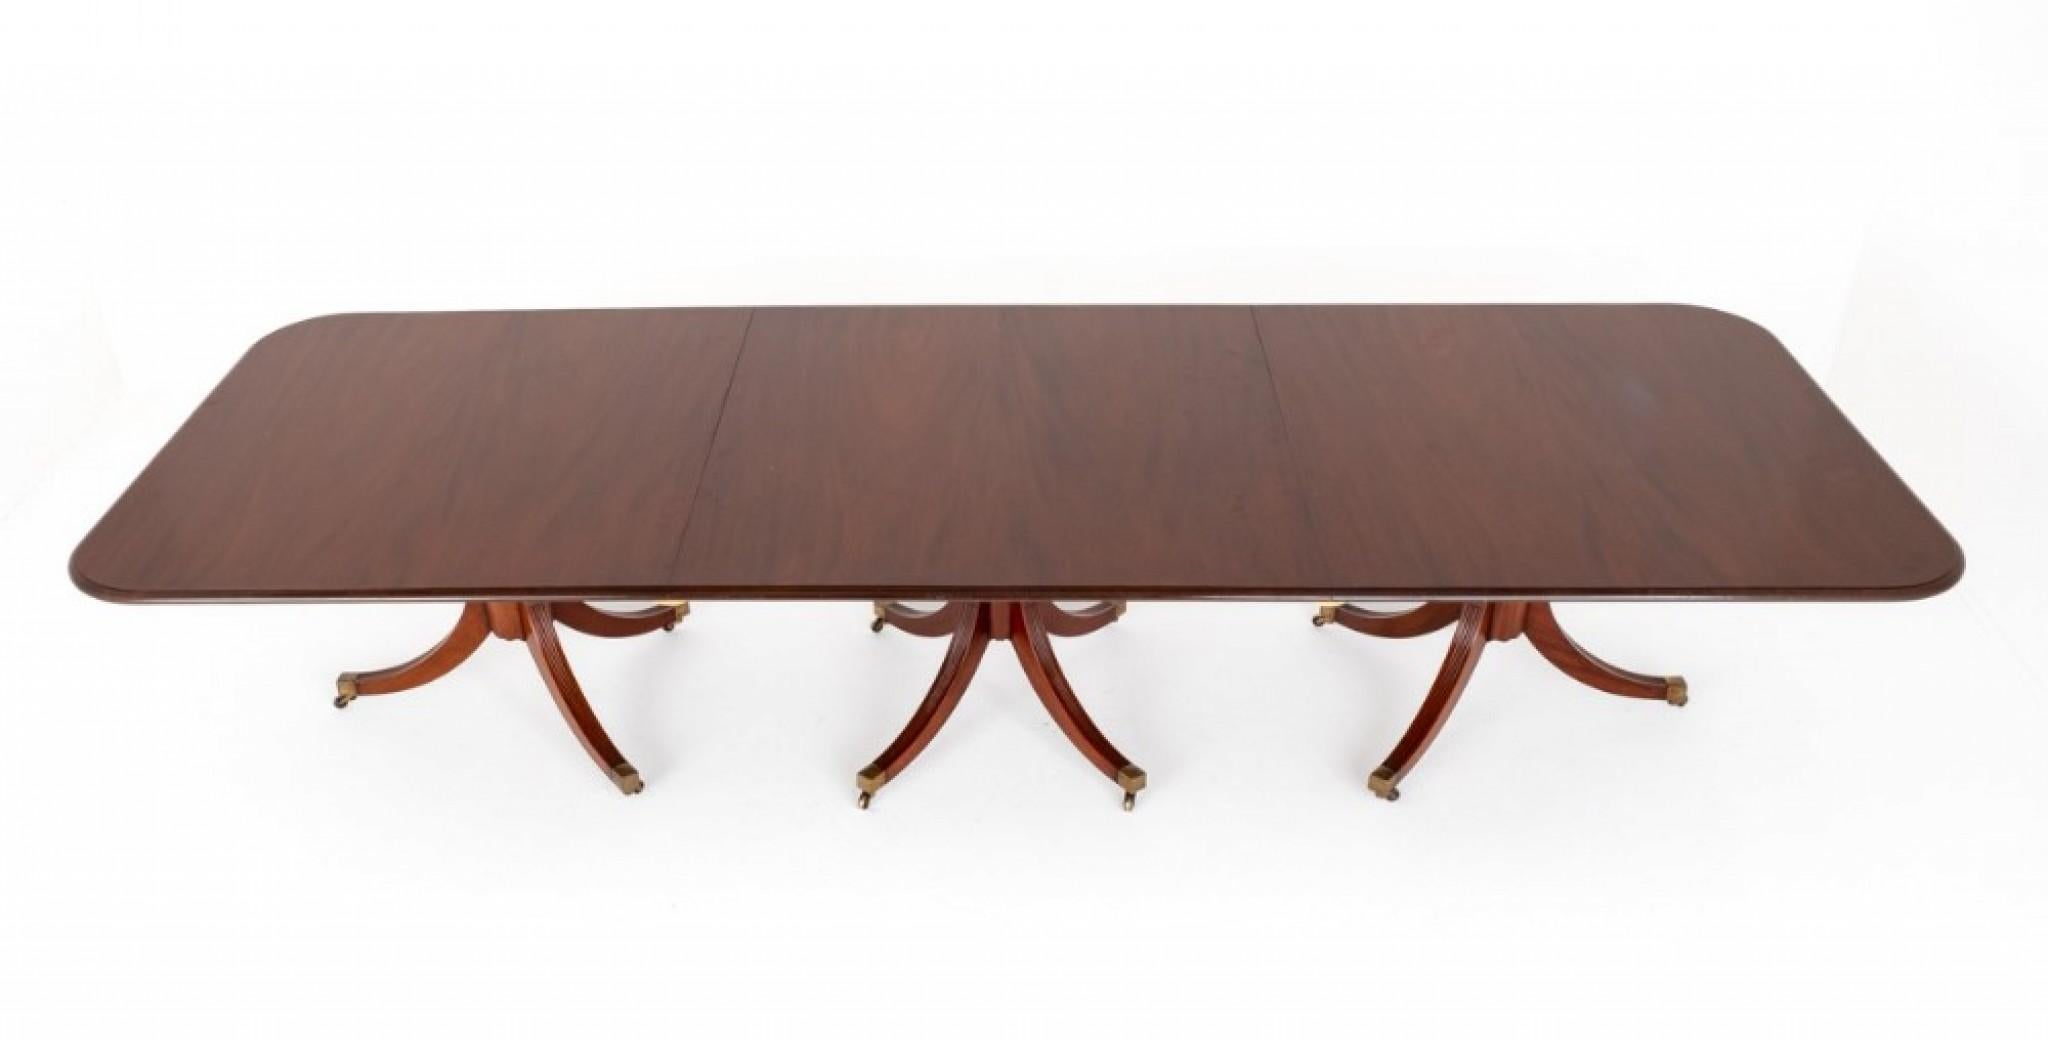 XL Regency Dining Table 18 Seater Extending Mahogany For Sale 2